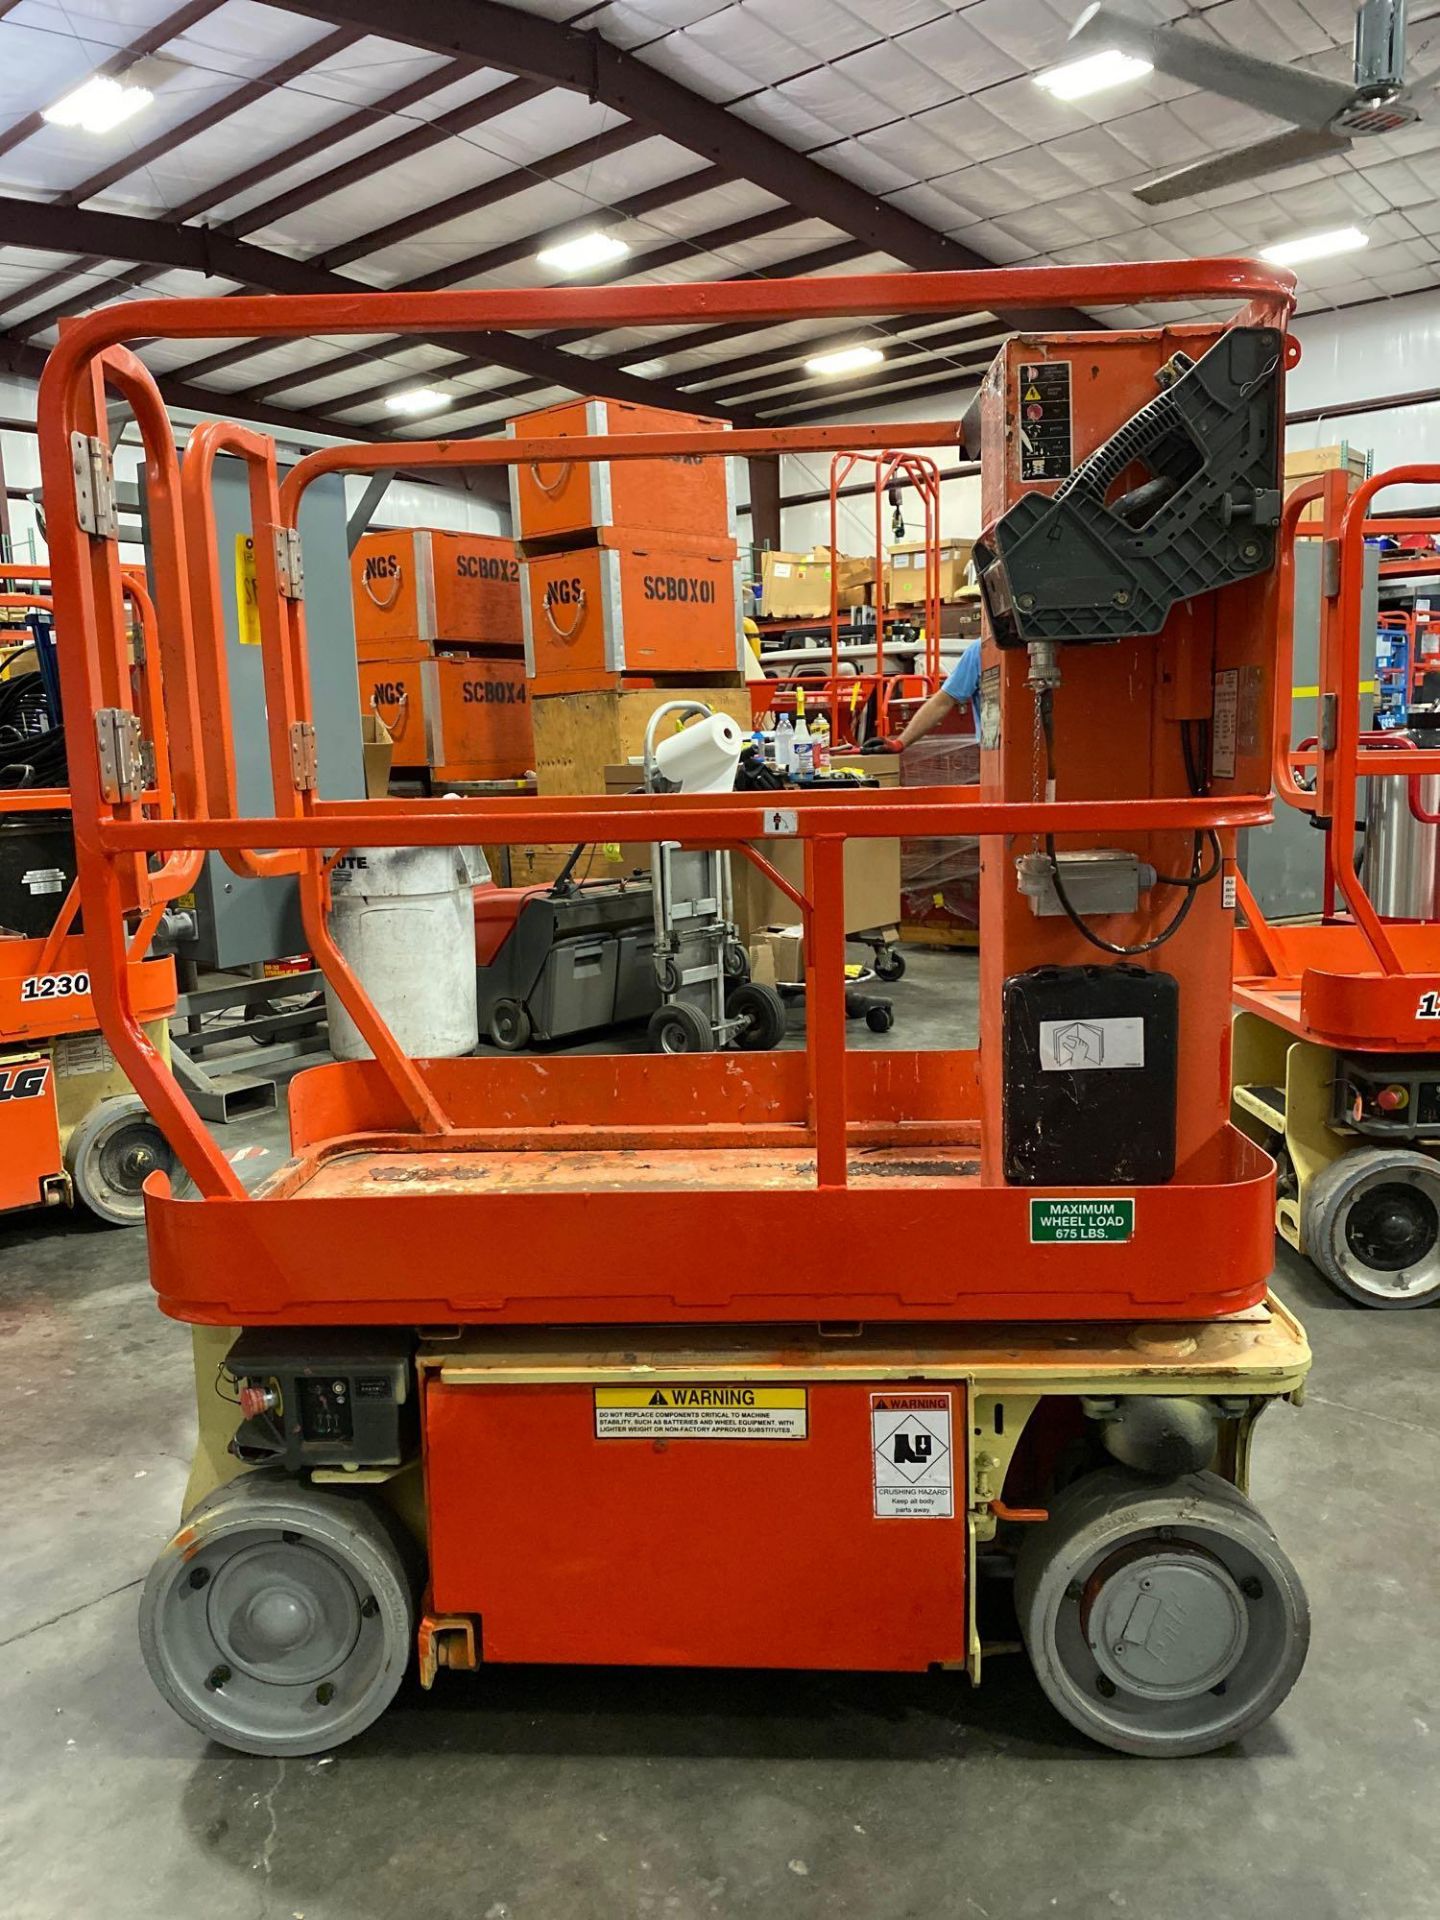 JLG 1230 ES ELECTRIC MAN LIFT, SELF PROPELLED, BUILT IN BATTERY CHARGER, 12' PLATFORM HEIGHT, APPROX - Image 3 of 6